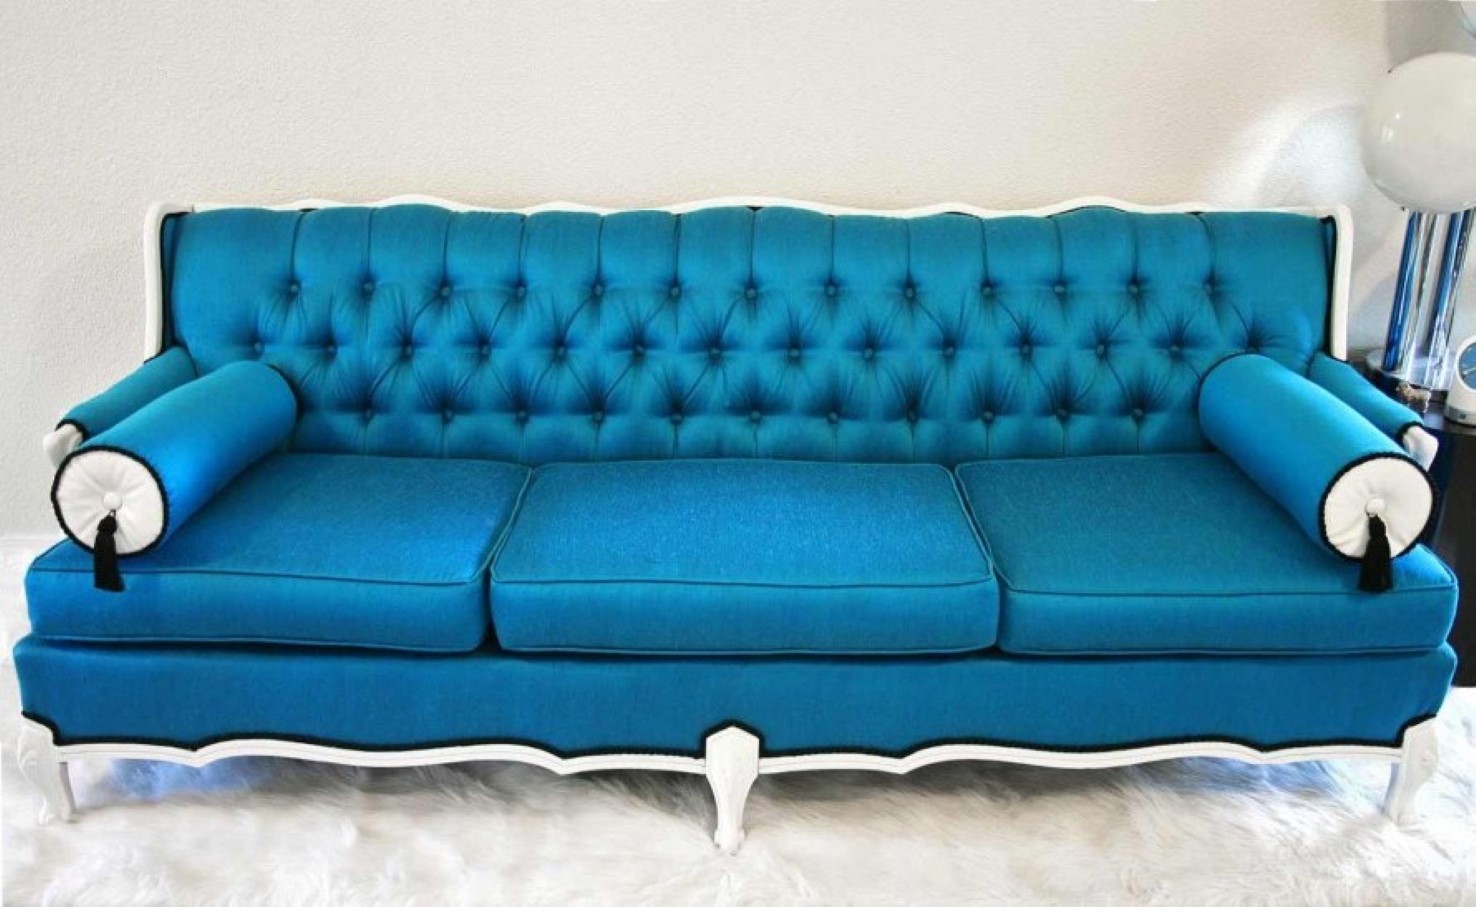 Blue Leather Tufted Awesome Blue Leather Sofa With Tufted Back Design And Twin Bolsters Idea Feat Plush White Fur Area Rug Furniture  Going Easy To Relax On A Blue Leather Sofa 